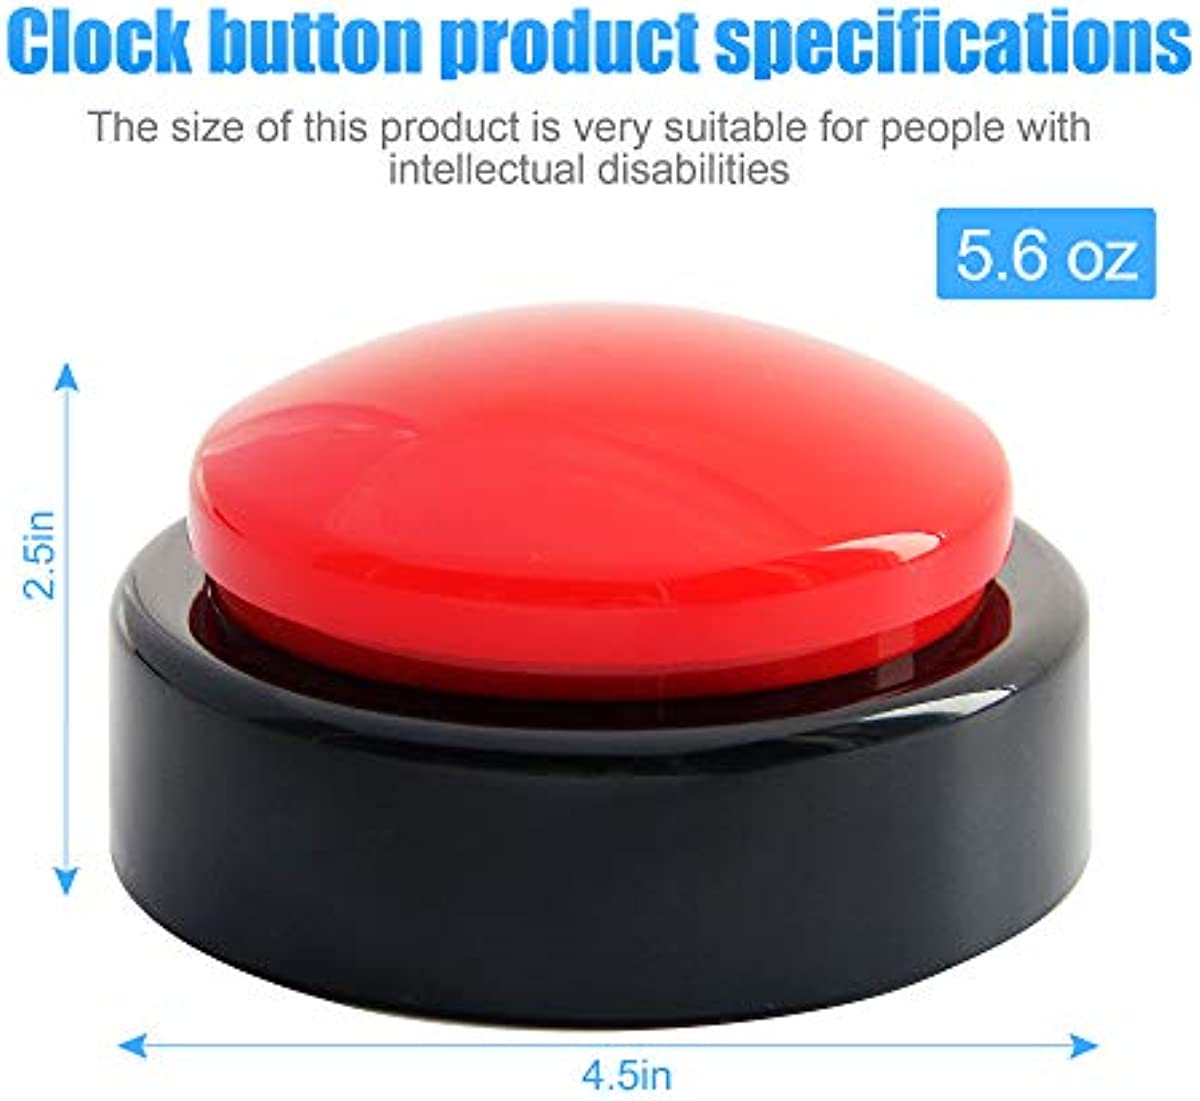 Extra Large Button Talking Alarm Clock with Volume Control - Speaks The Time, Date and Day - Perfect for The Blind, Elderly or Visually Impaired - Includes Batteries (Red and Black)